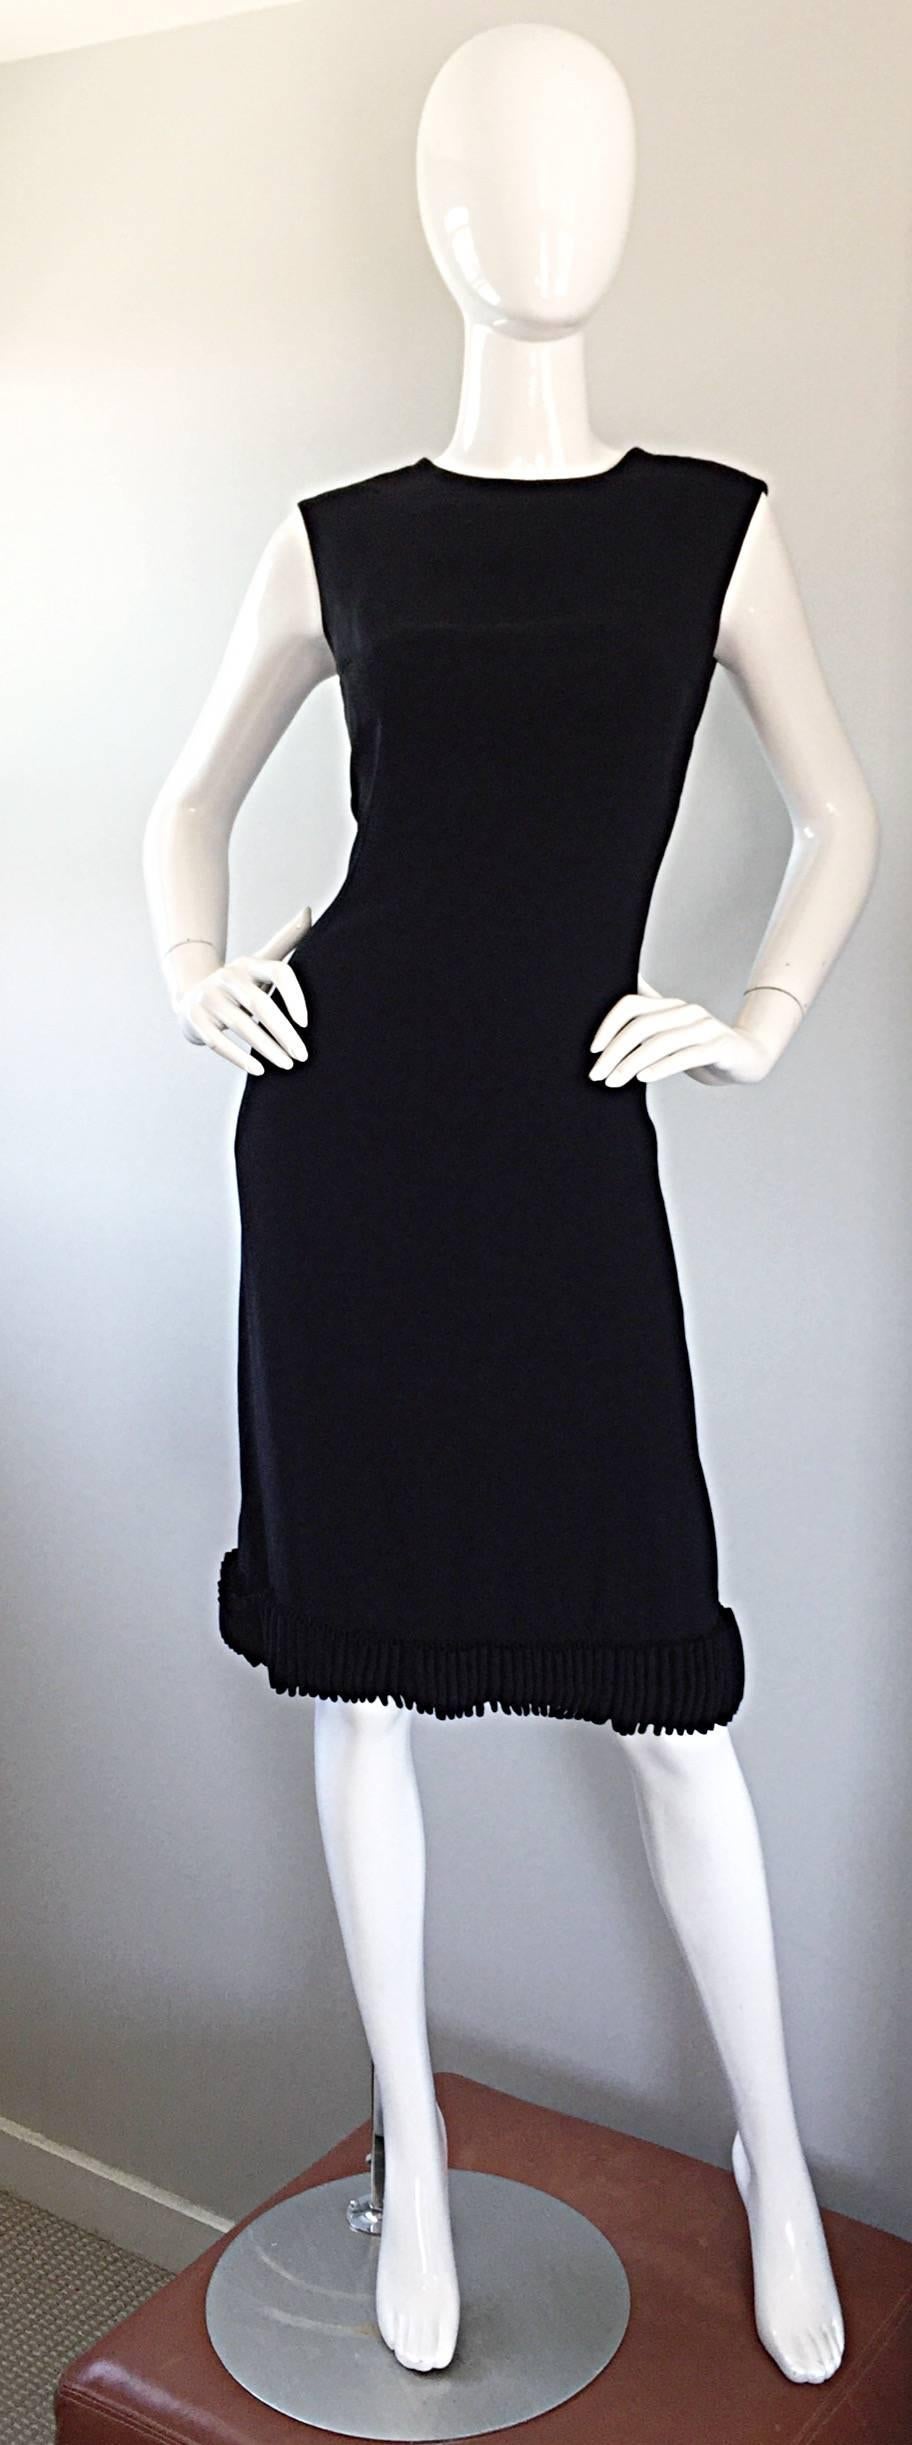 The perfect 60s little black vintage dress by SHANNON RODGERS! Insanely well made, with so much attention to detail! The perfect shift shape hugs the body in all the right places. Ribbon ruffle hem is a signature Rogers trait--She always produces